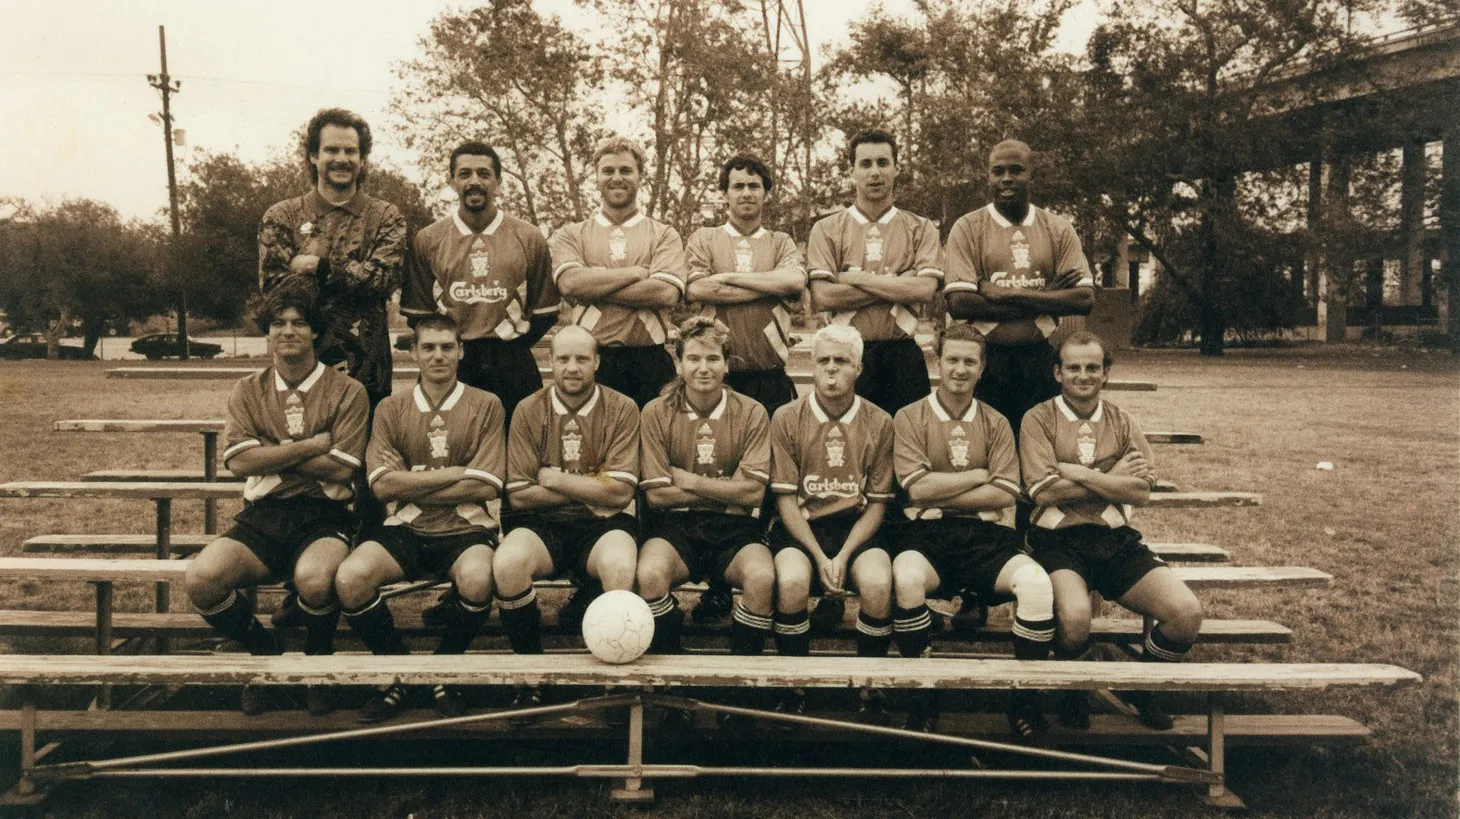 Hollywood United poses for a photo during their unbeaten season.